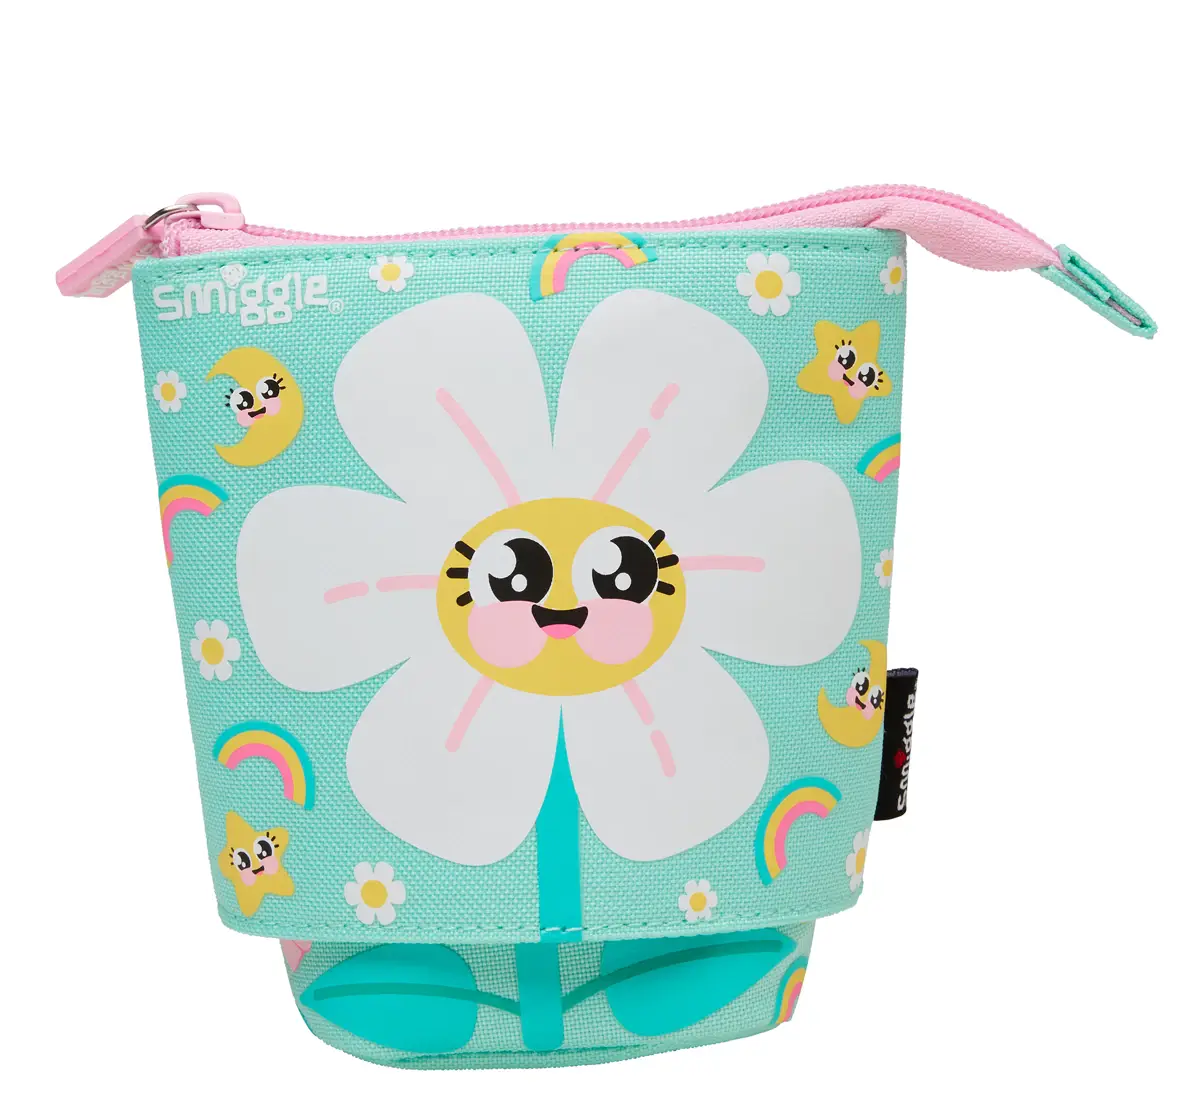 Smiggle Movin' Pencil Case Stand, Mint, 3Y+